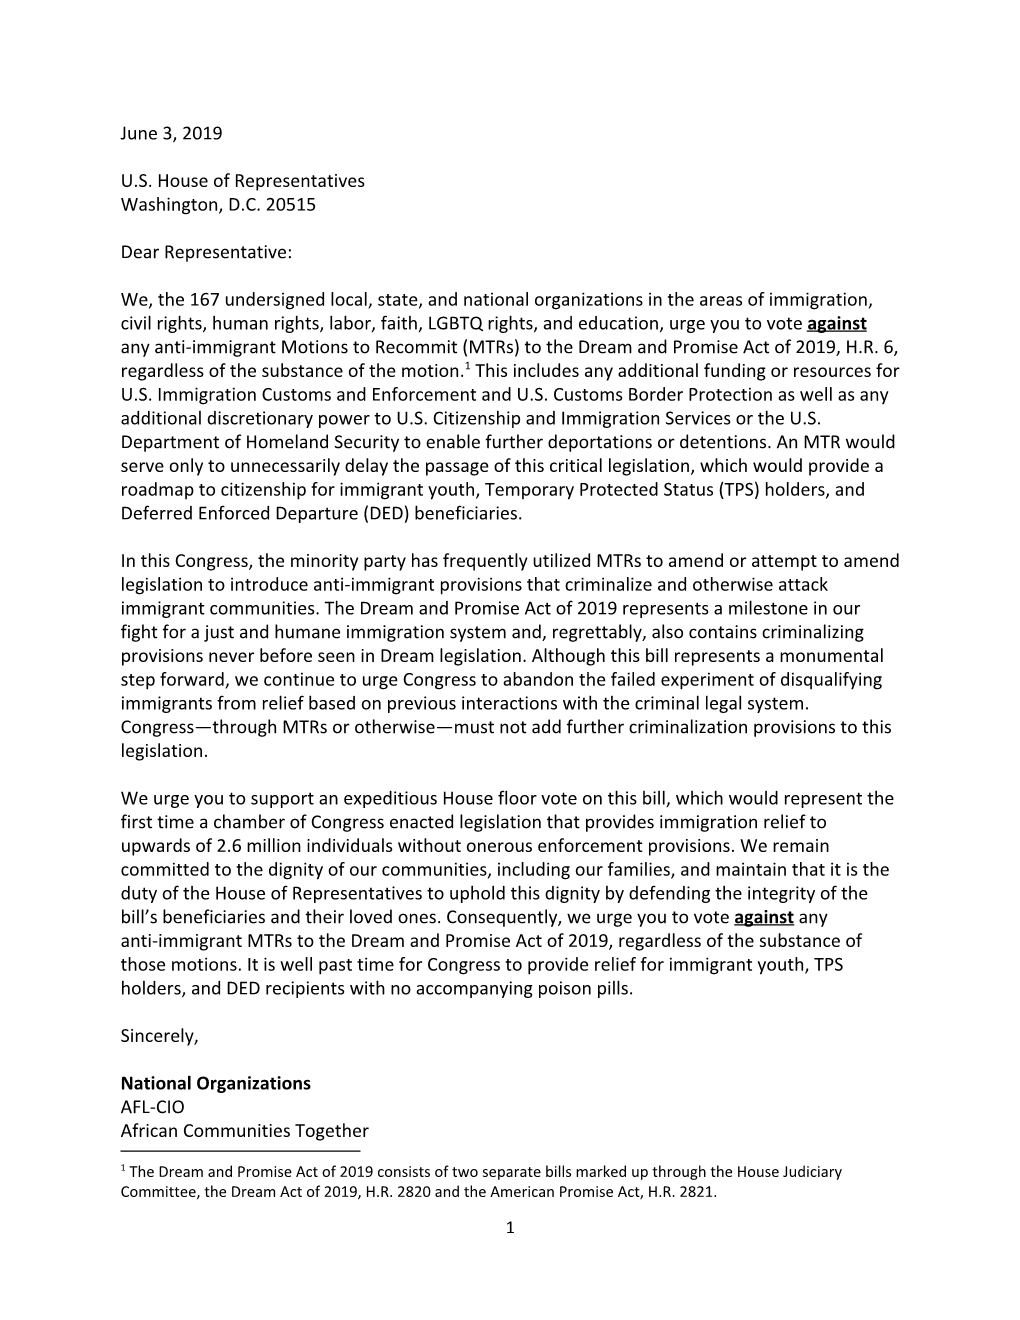 2019-06-03 Organizational Sign-On Letter Opposing Mtrs to Dream and Promise